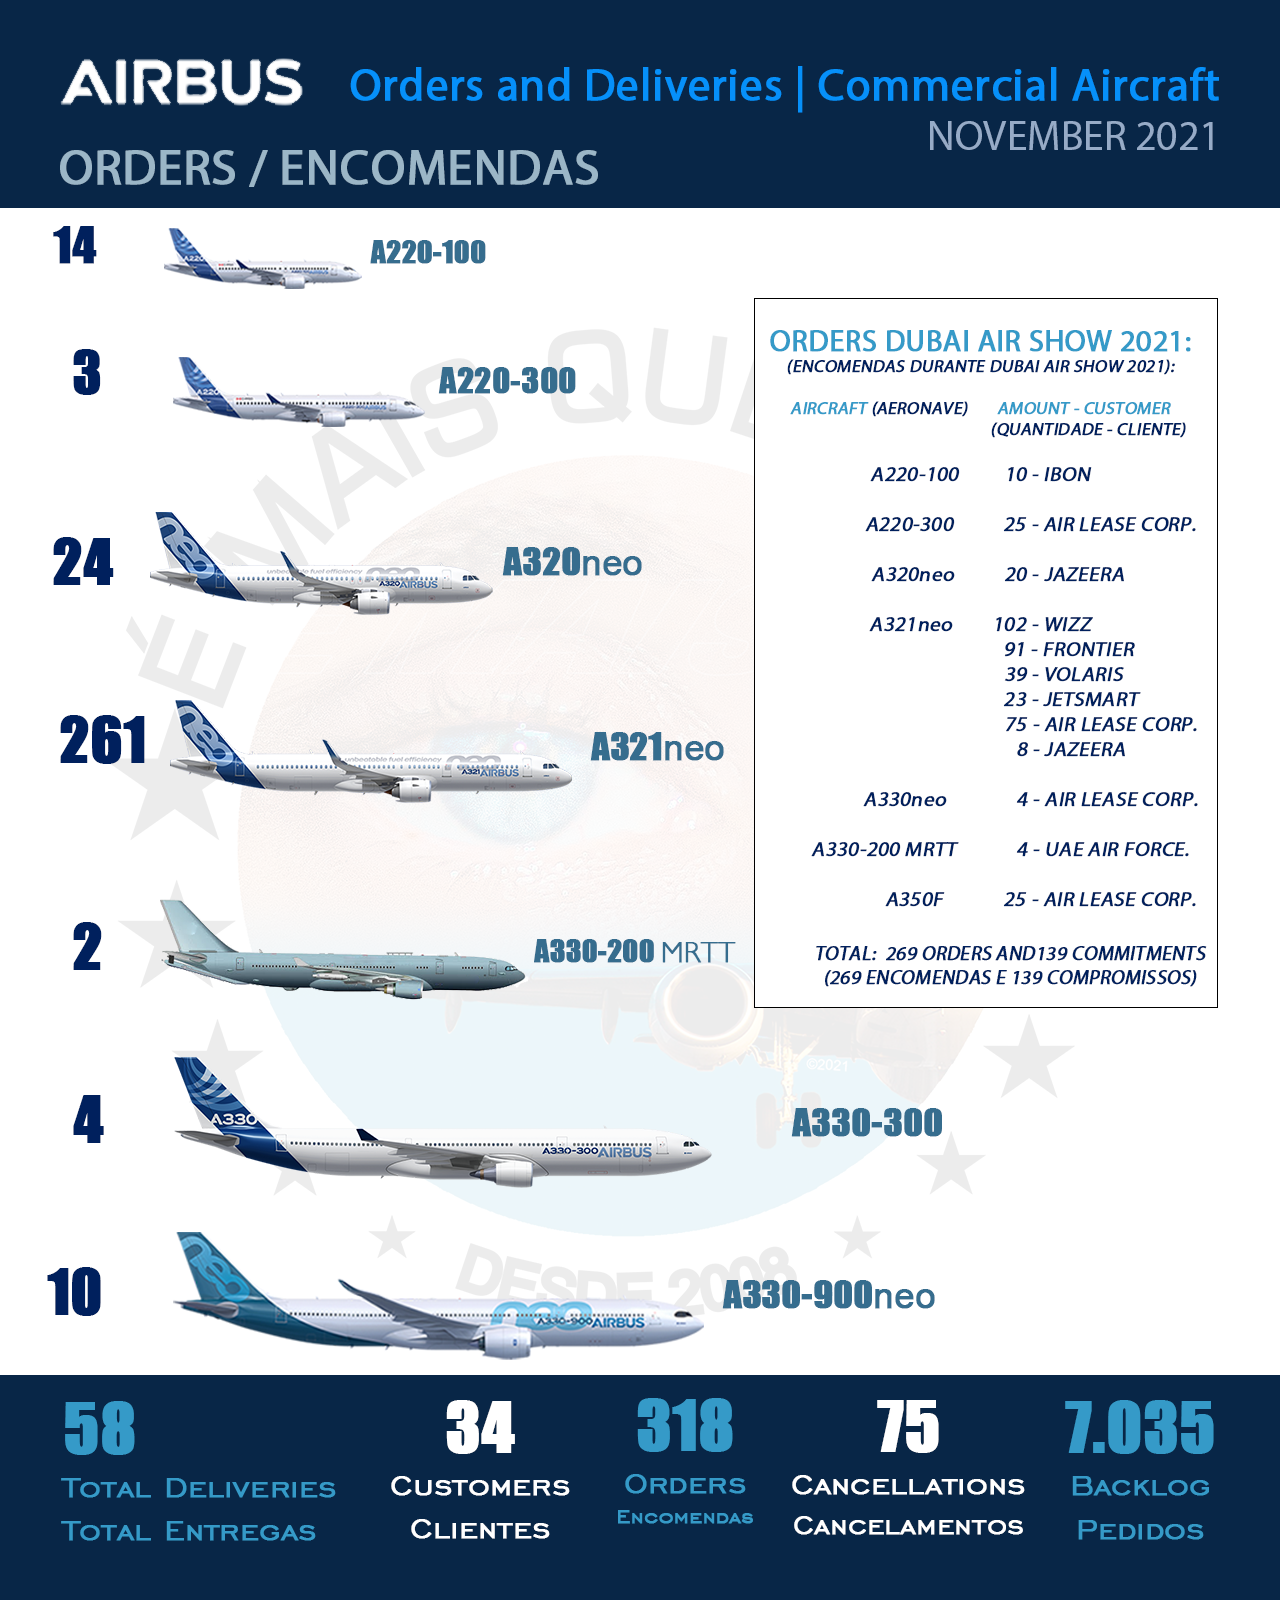 INFOGRAPHIC: Orders and Deliveries Airbus Commercial Aircraft – November 2021 | MORE THAN FLY